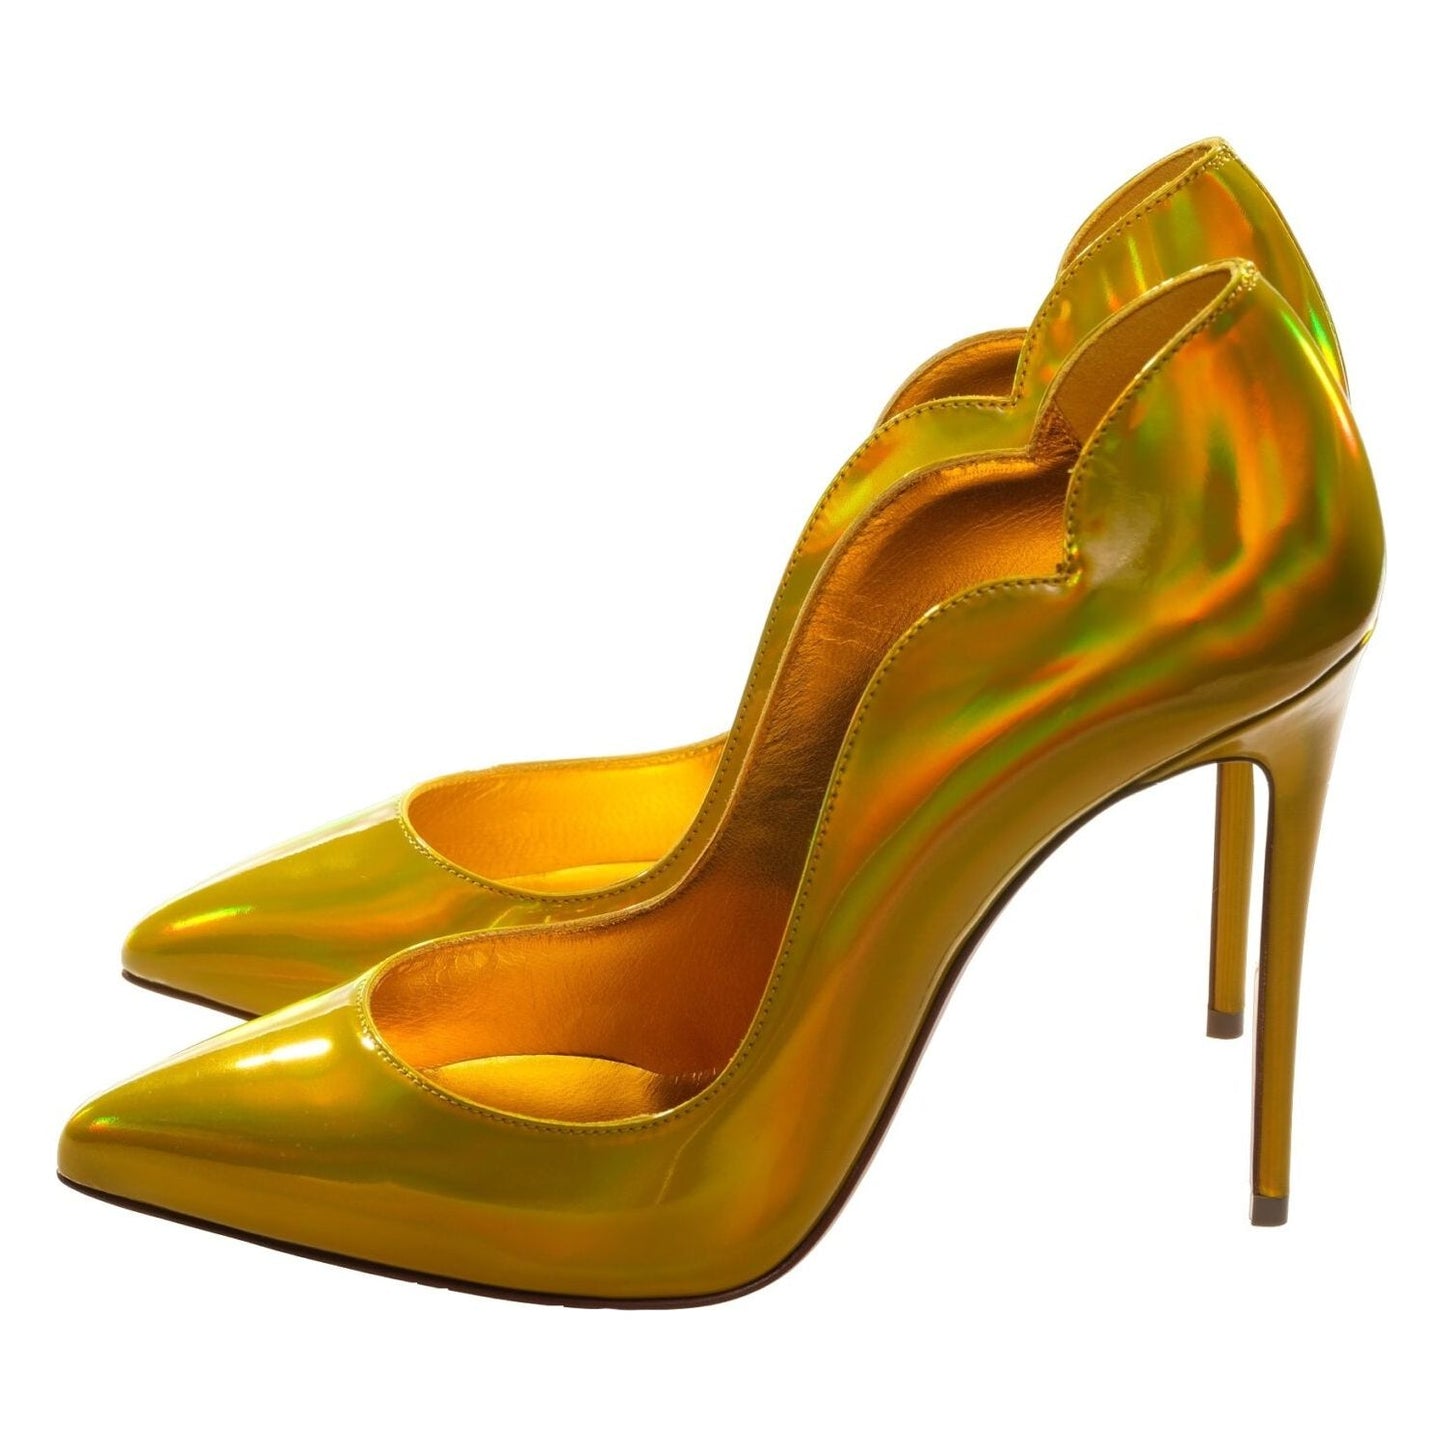 Hot Chick 100 Yellow Mirrored Patent Leather High Heel Pumps